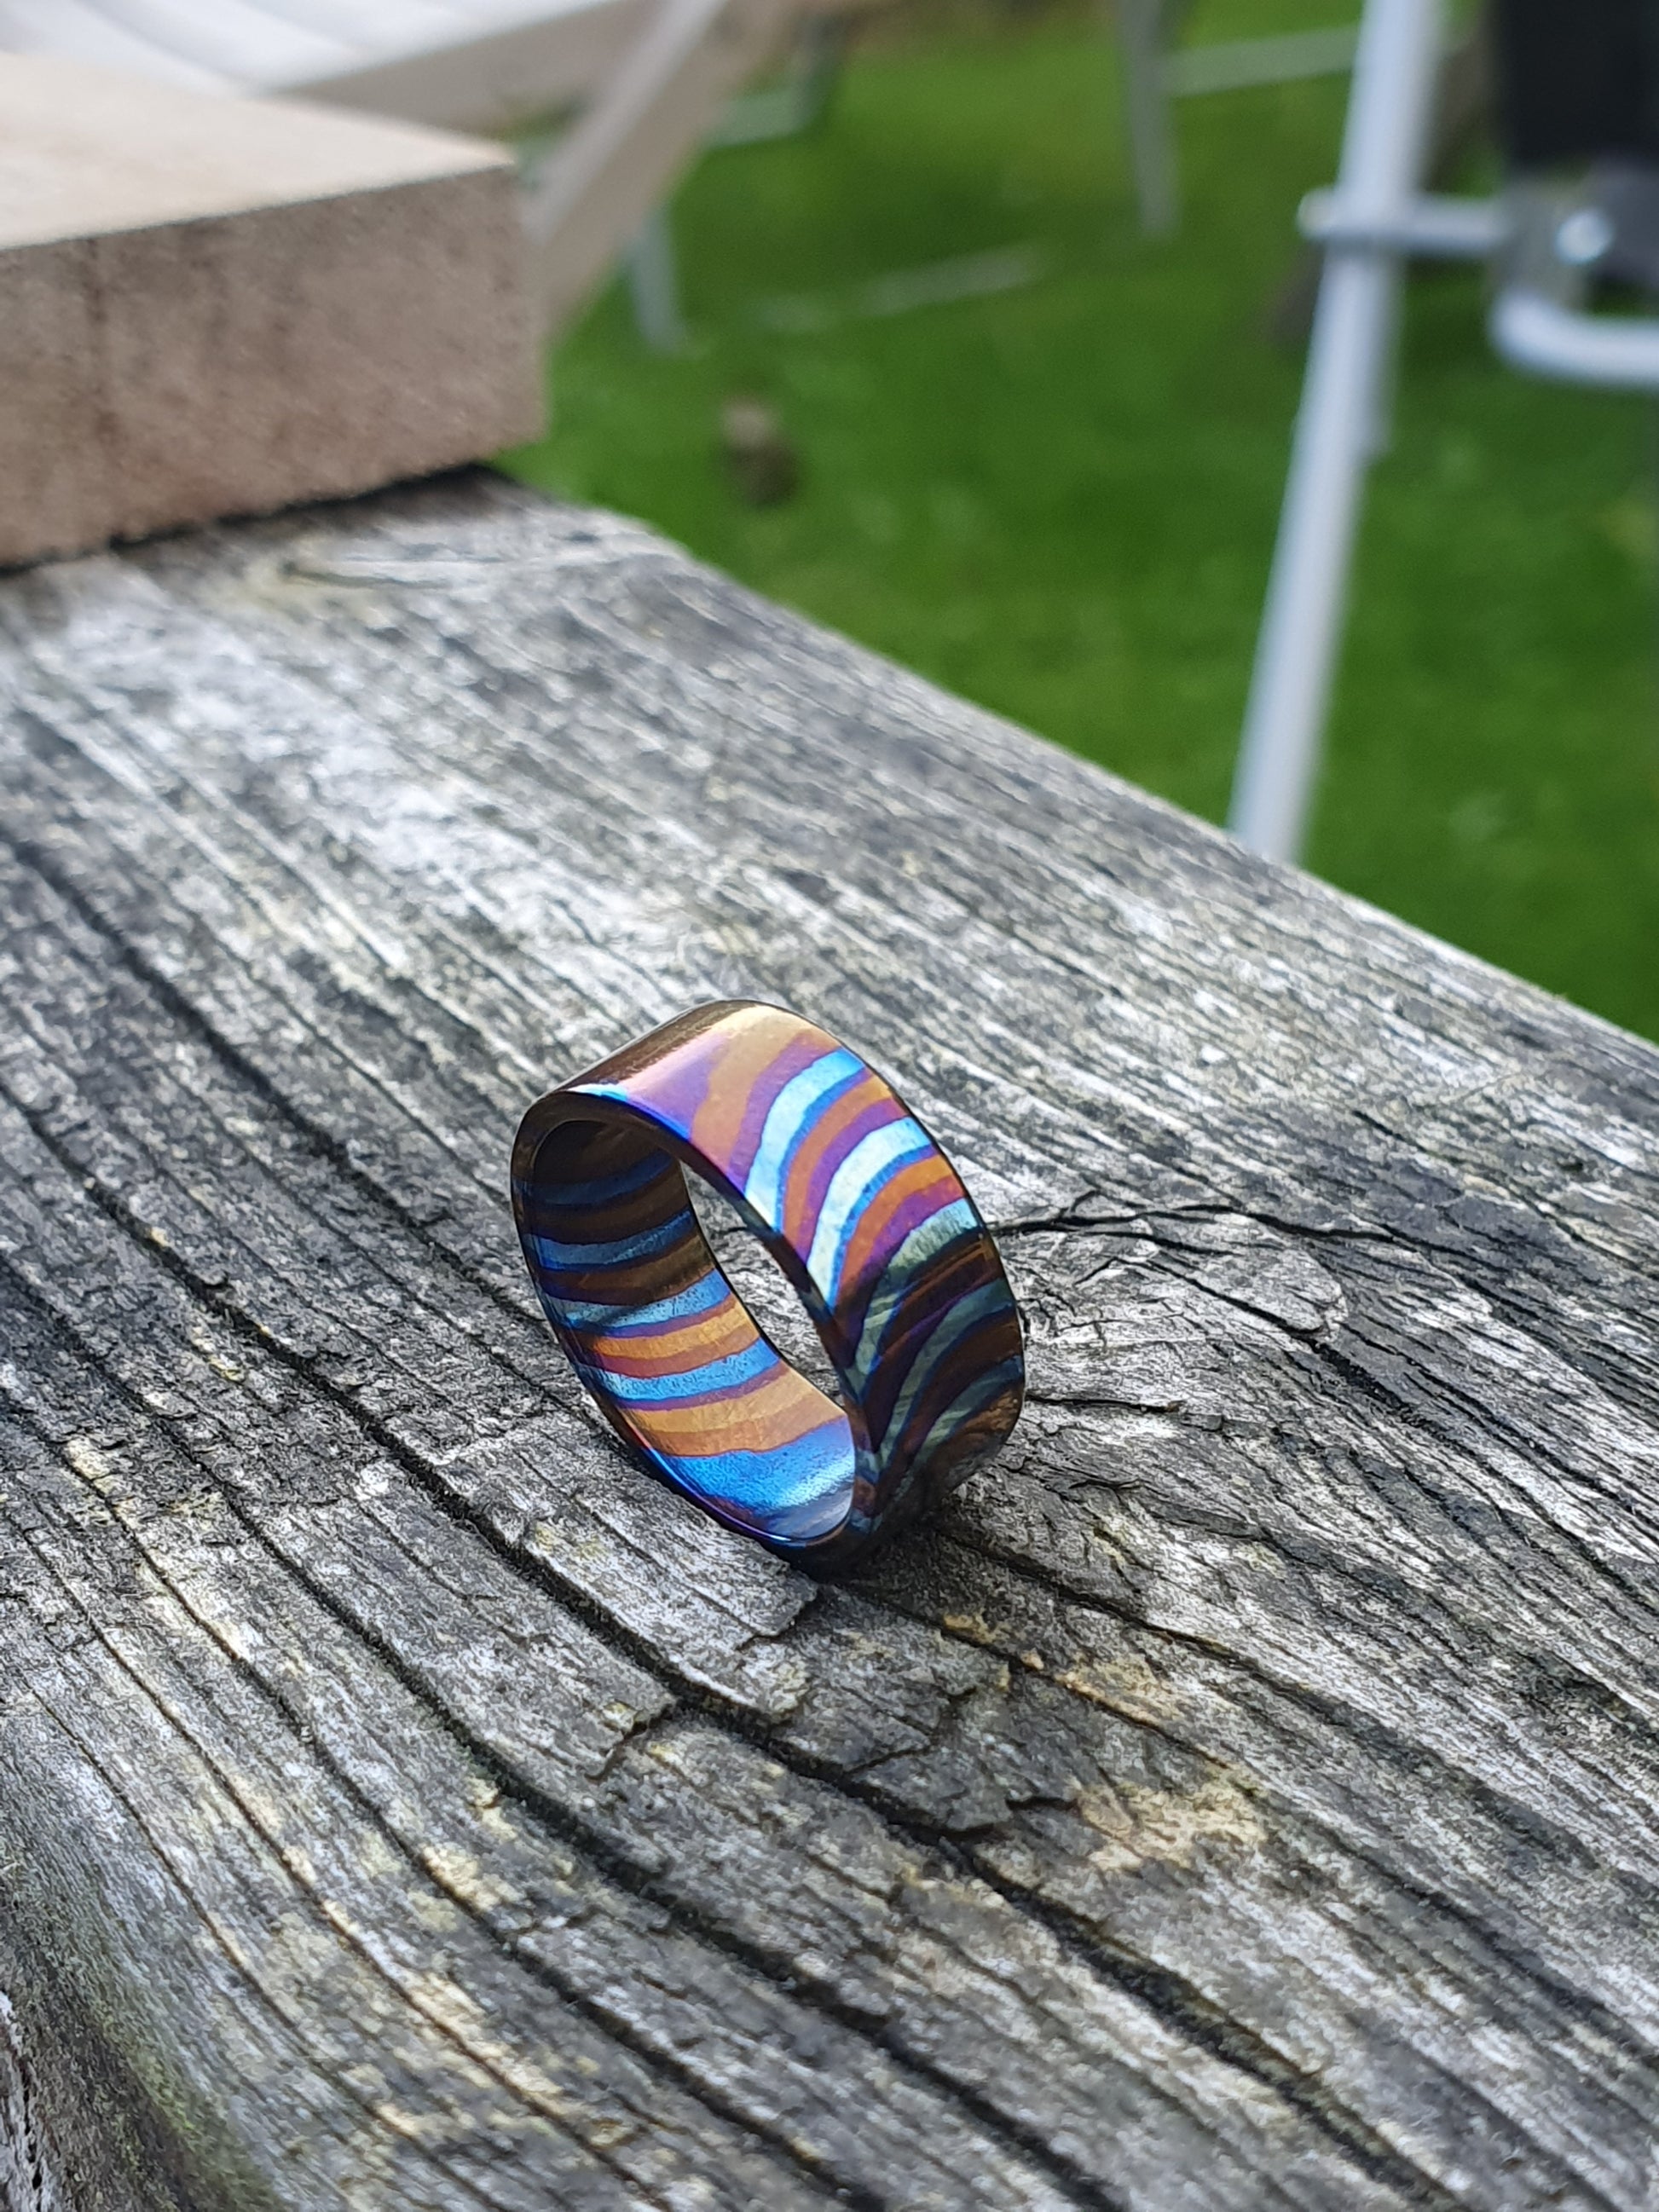 timascus ring 7mm wide stood up